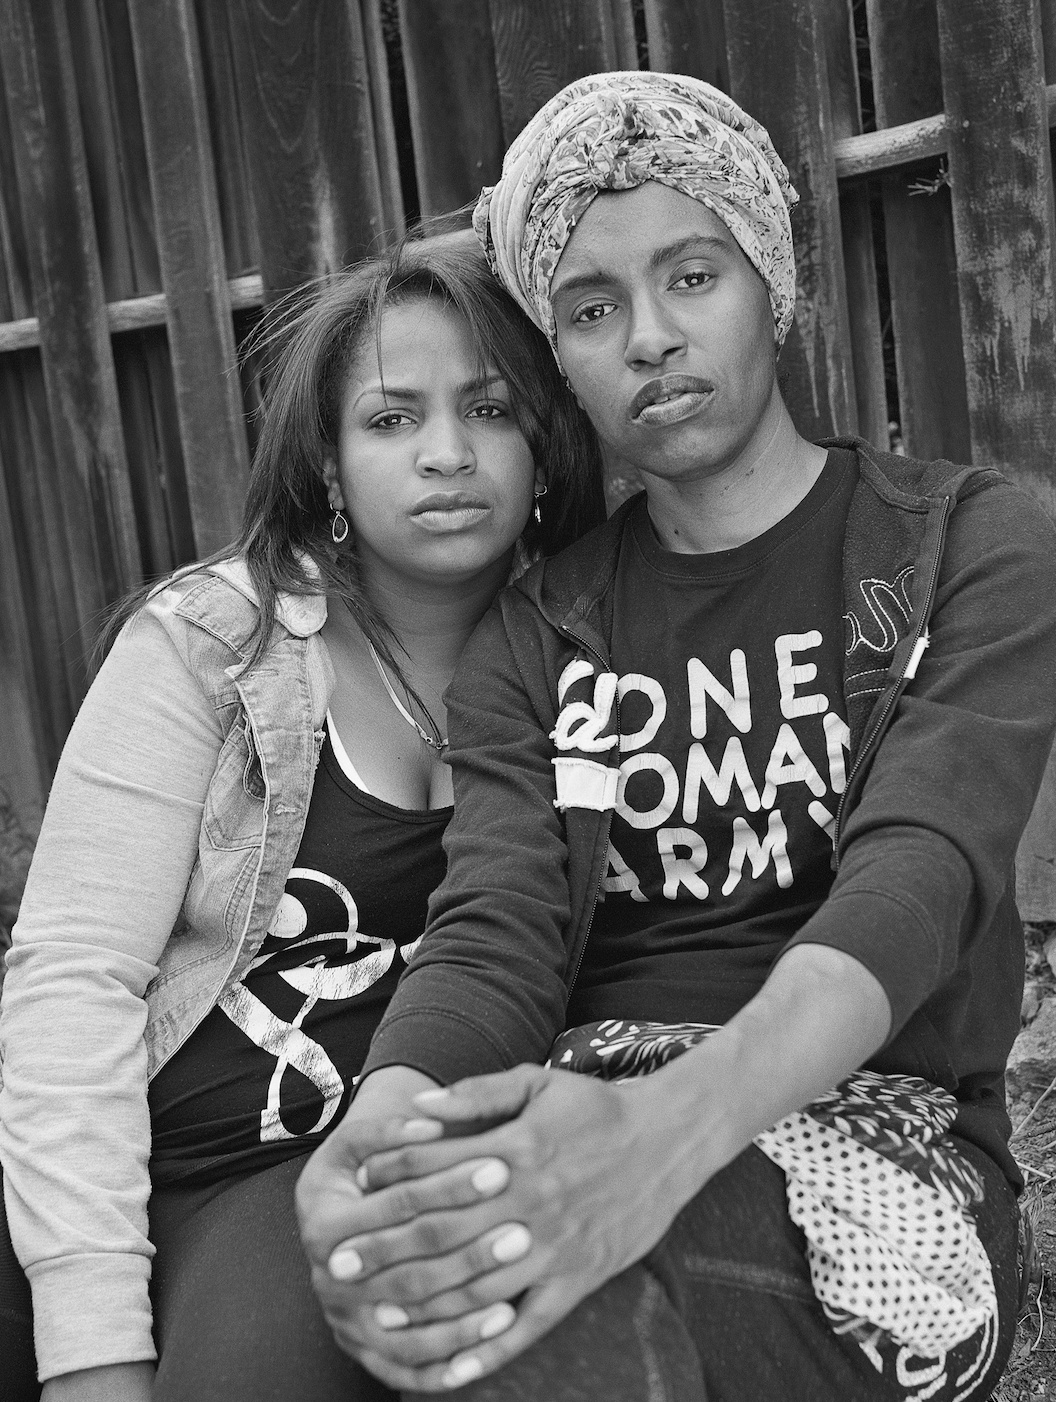 A black-and-white portrait of two women with a dark skin tone. The woman on the right wears a head wrap and a black T-shirt that says “One Woman Army” in white capital letters. The woman on the left is leaning on her shoulder. Both look into the camera with a skeptical expression on their face.